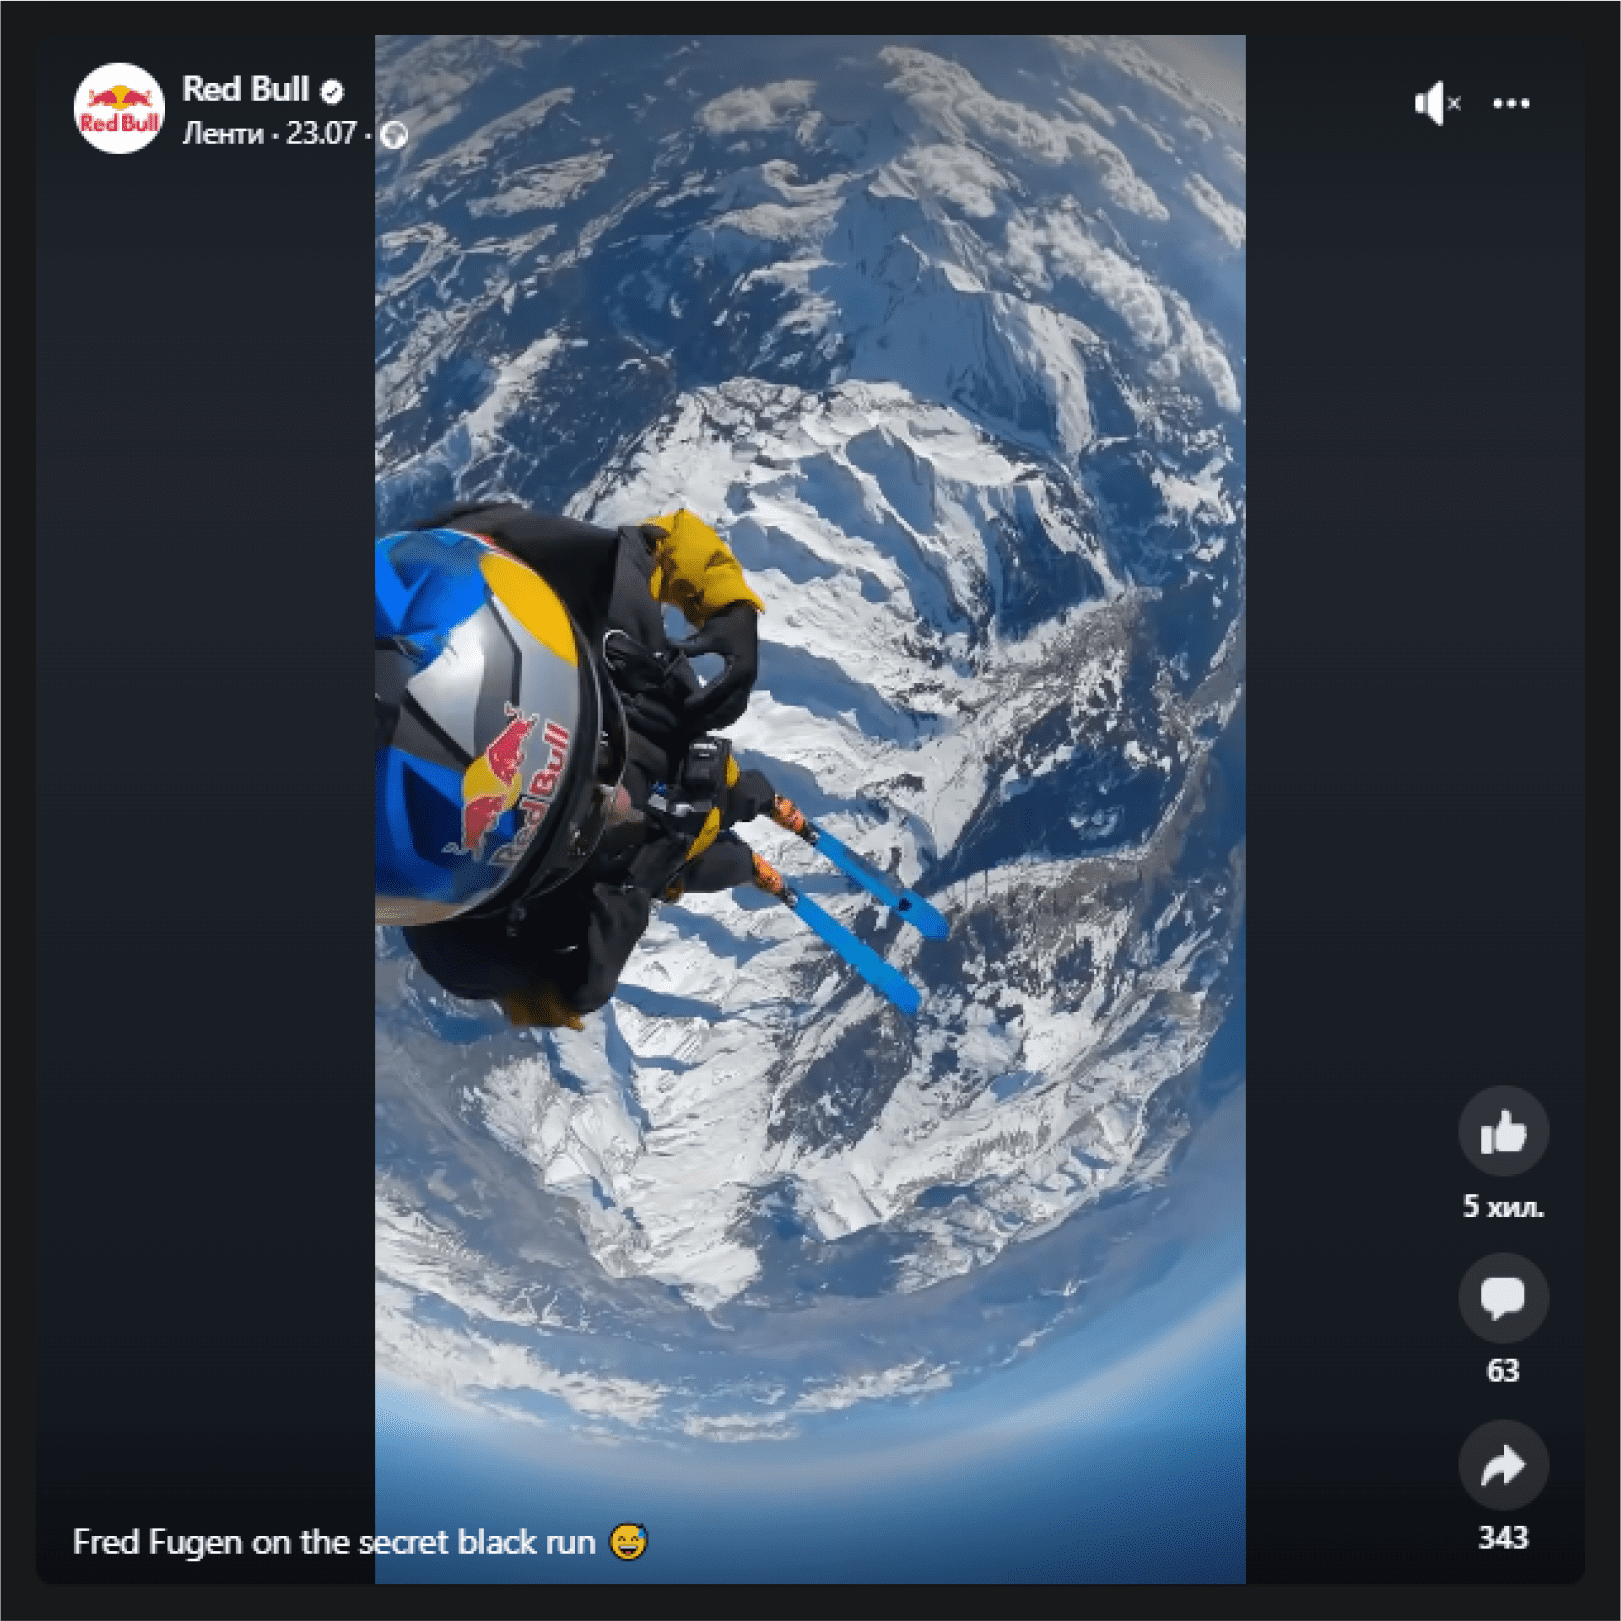 Red Bull Facebook post showing an extreme athlete skydiving over snow-capped mountains, capturing the brand's essence of adventure and high energy.